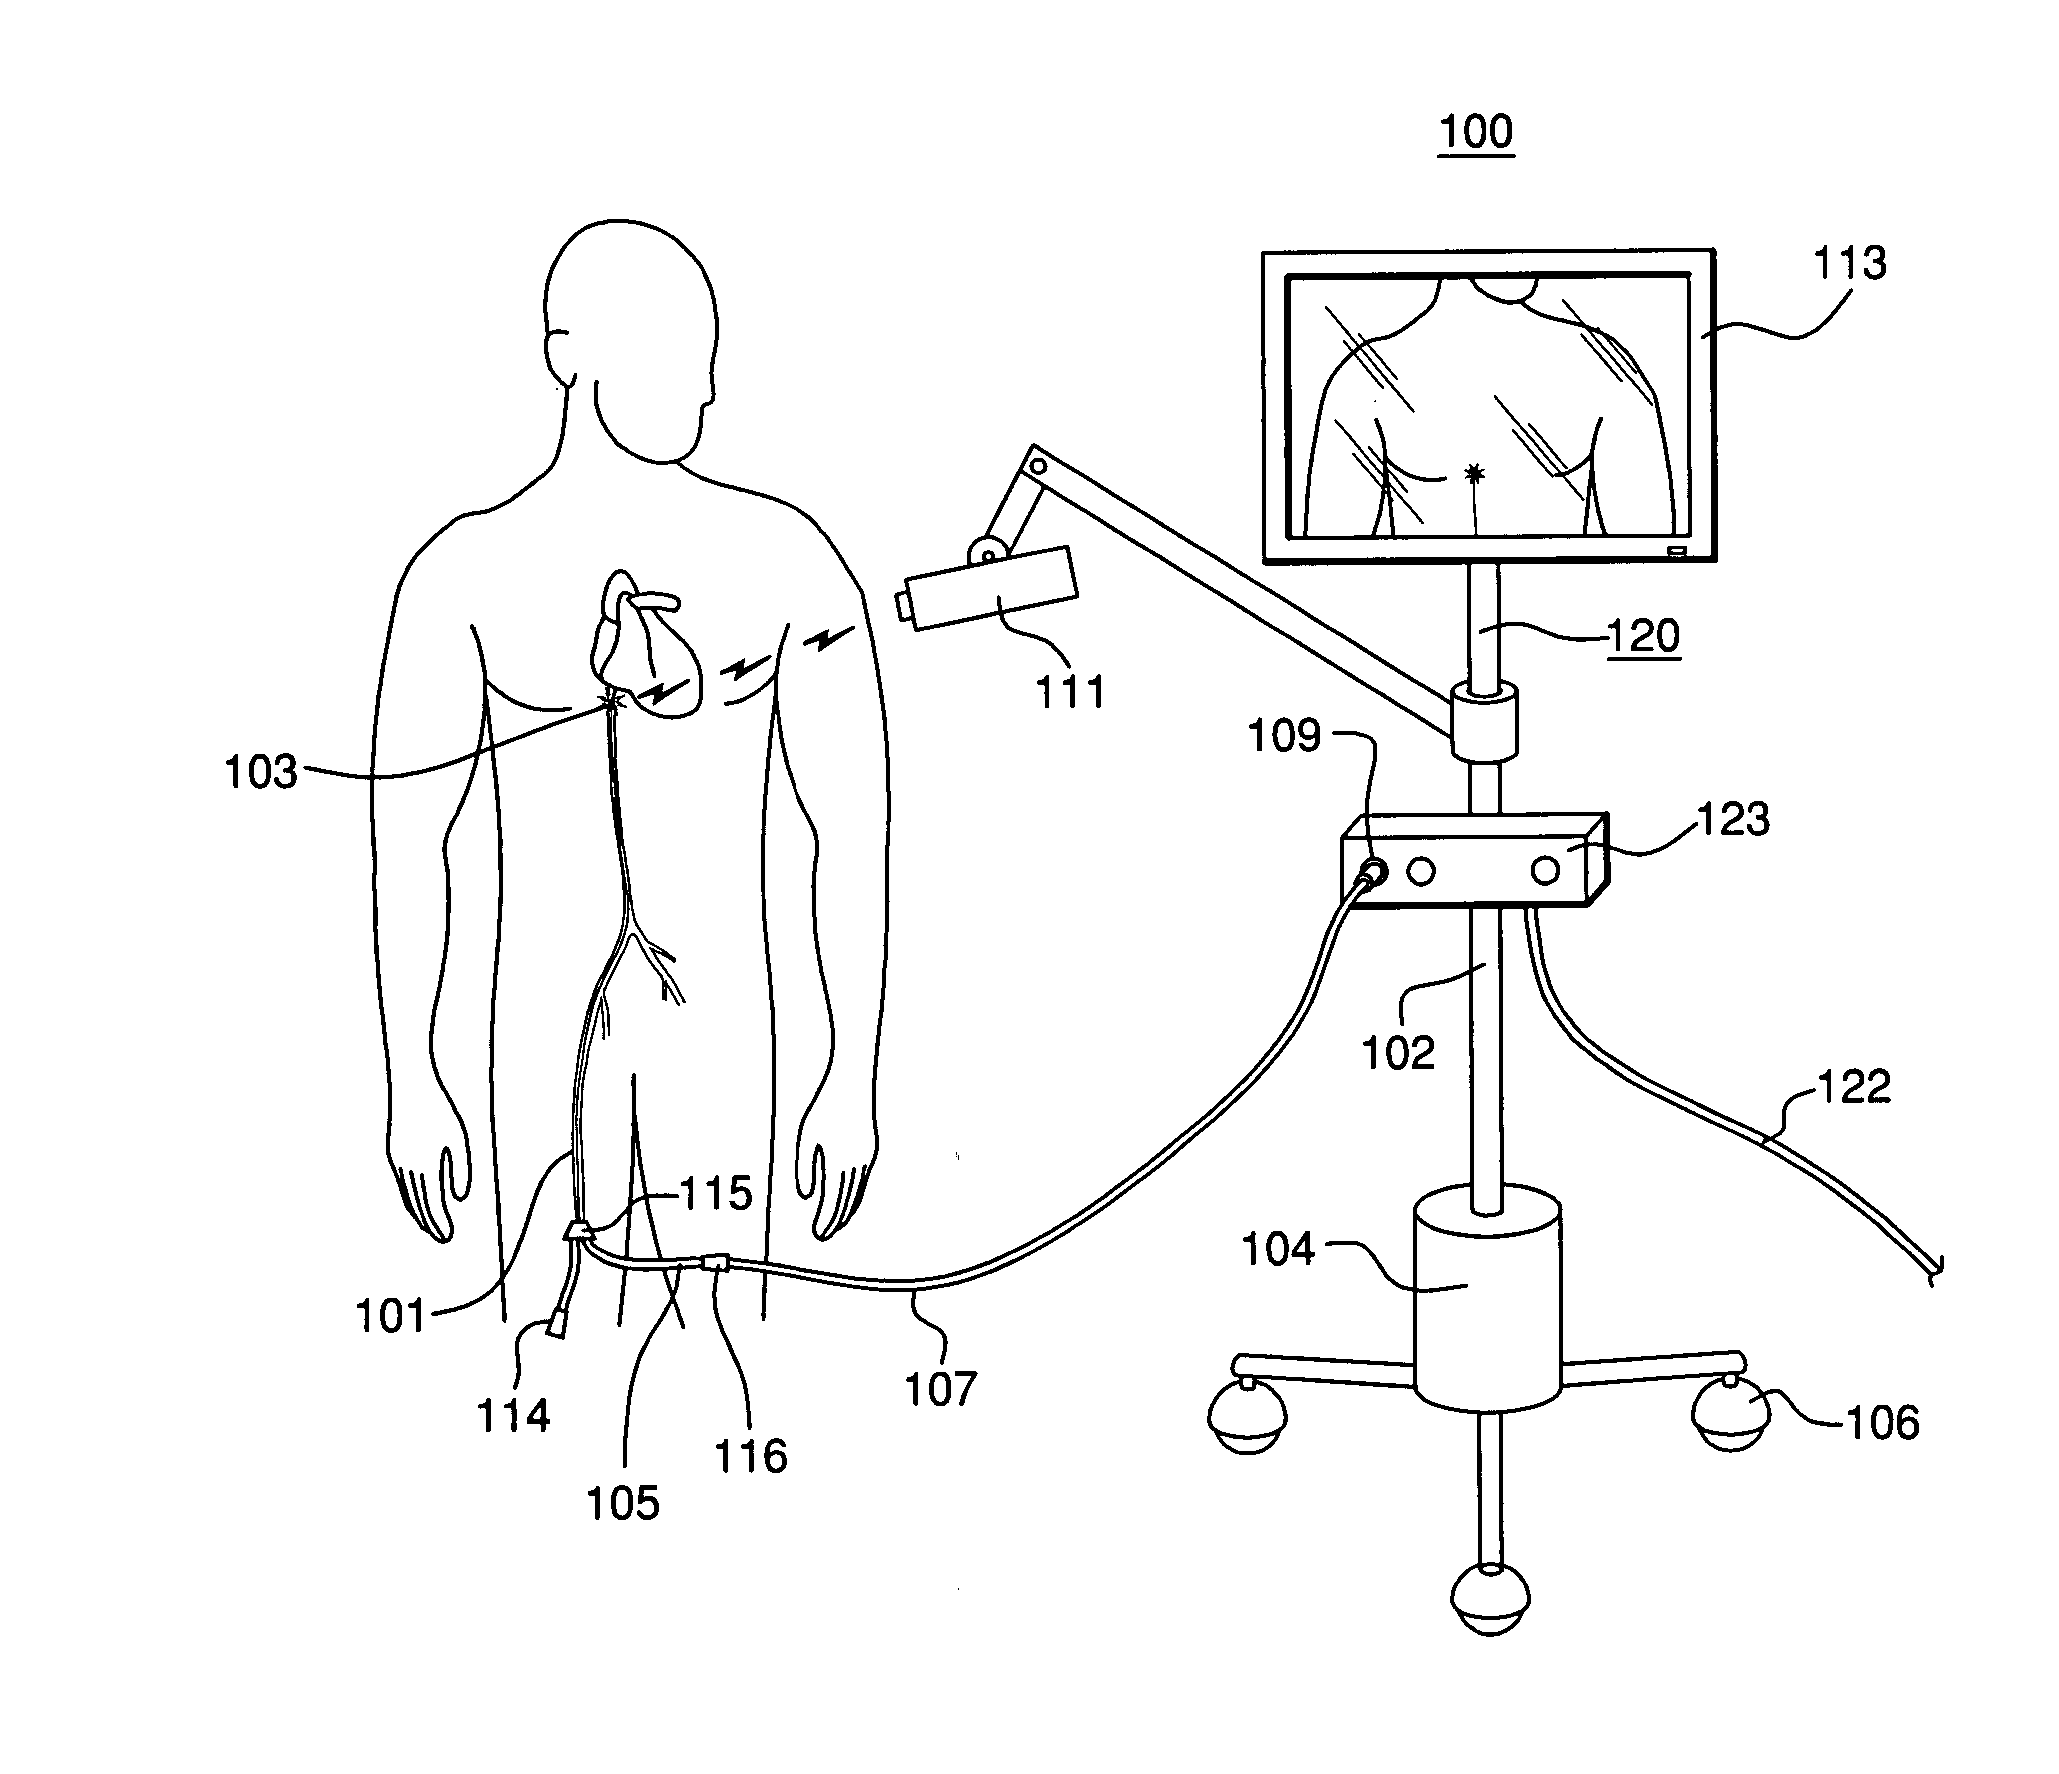 Optically guided system for precise placement of a medical catheter in a patient